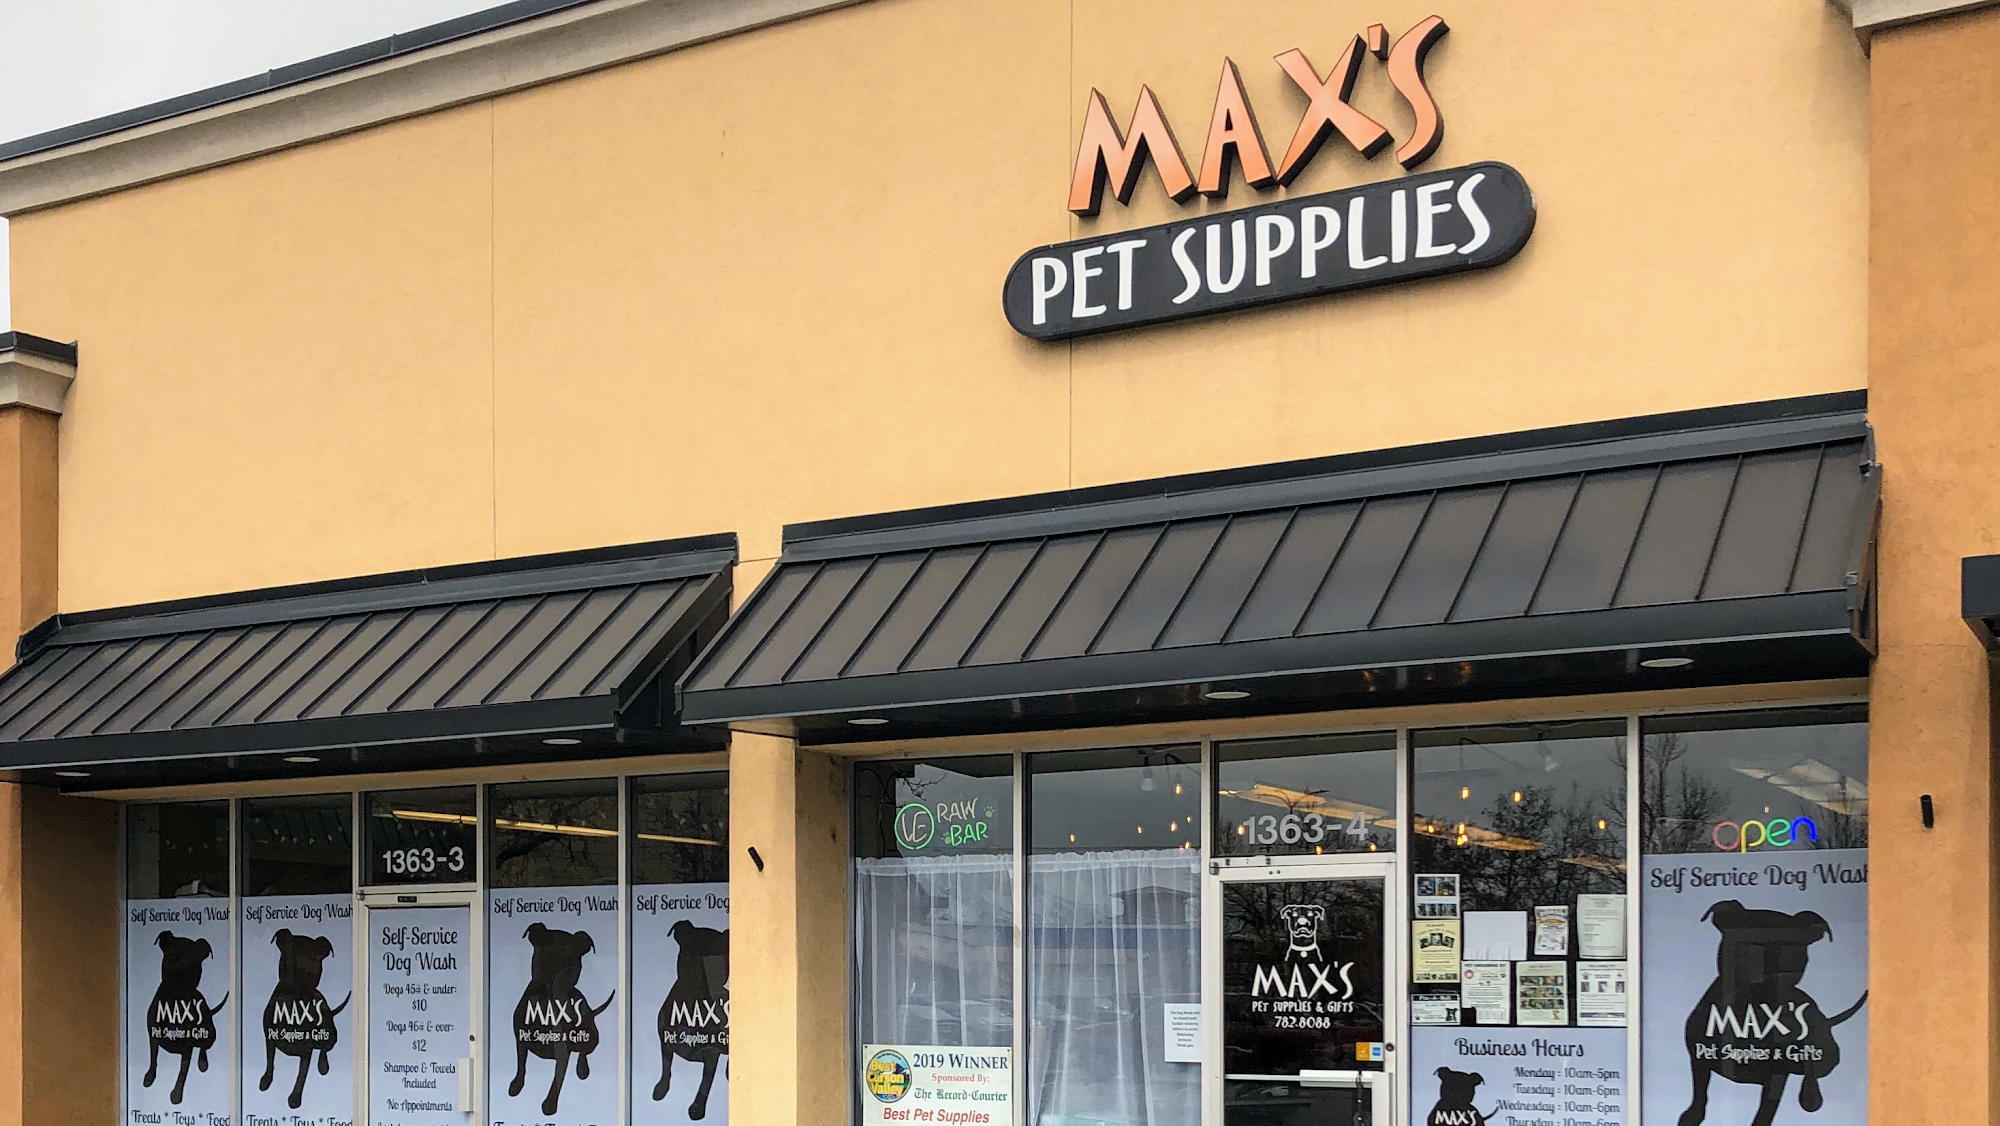 Max's Pet Supplies & Gifts